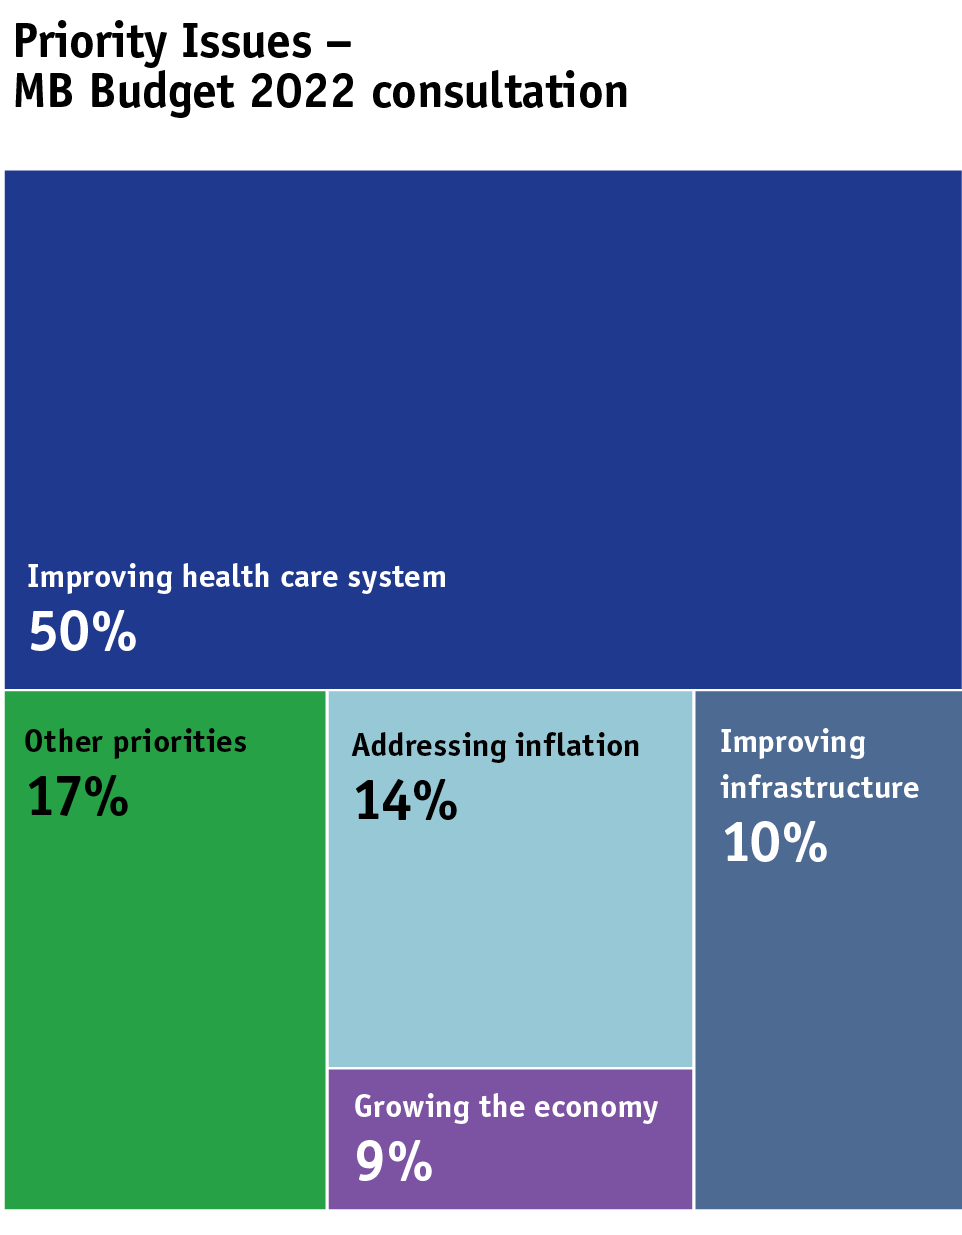 block chart showing health care system improvement as Manitobans’ biggest priority issue for budget 2022